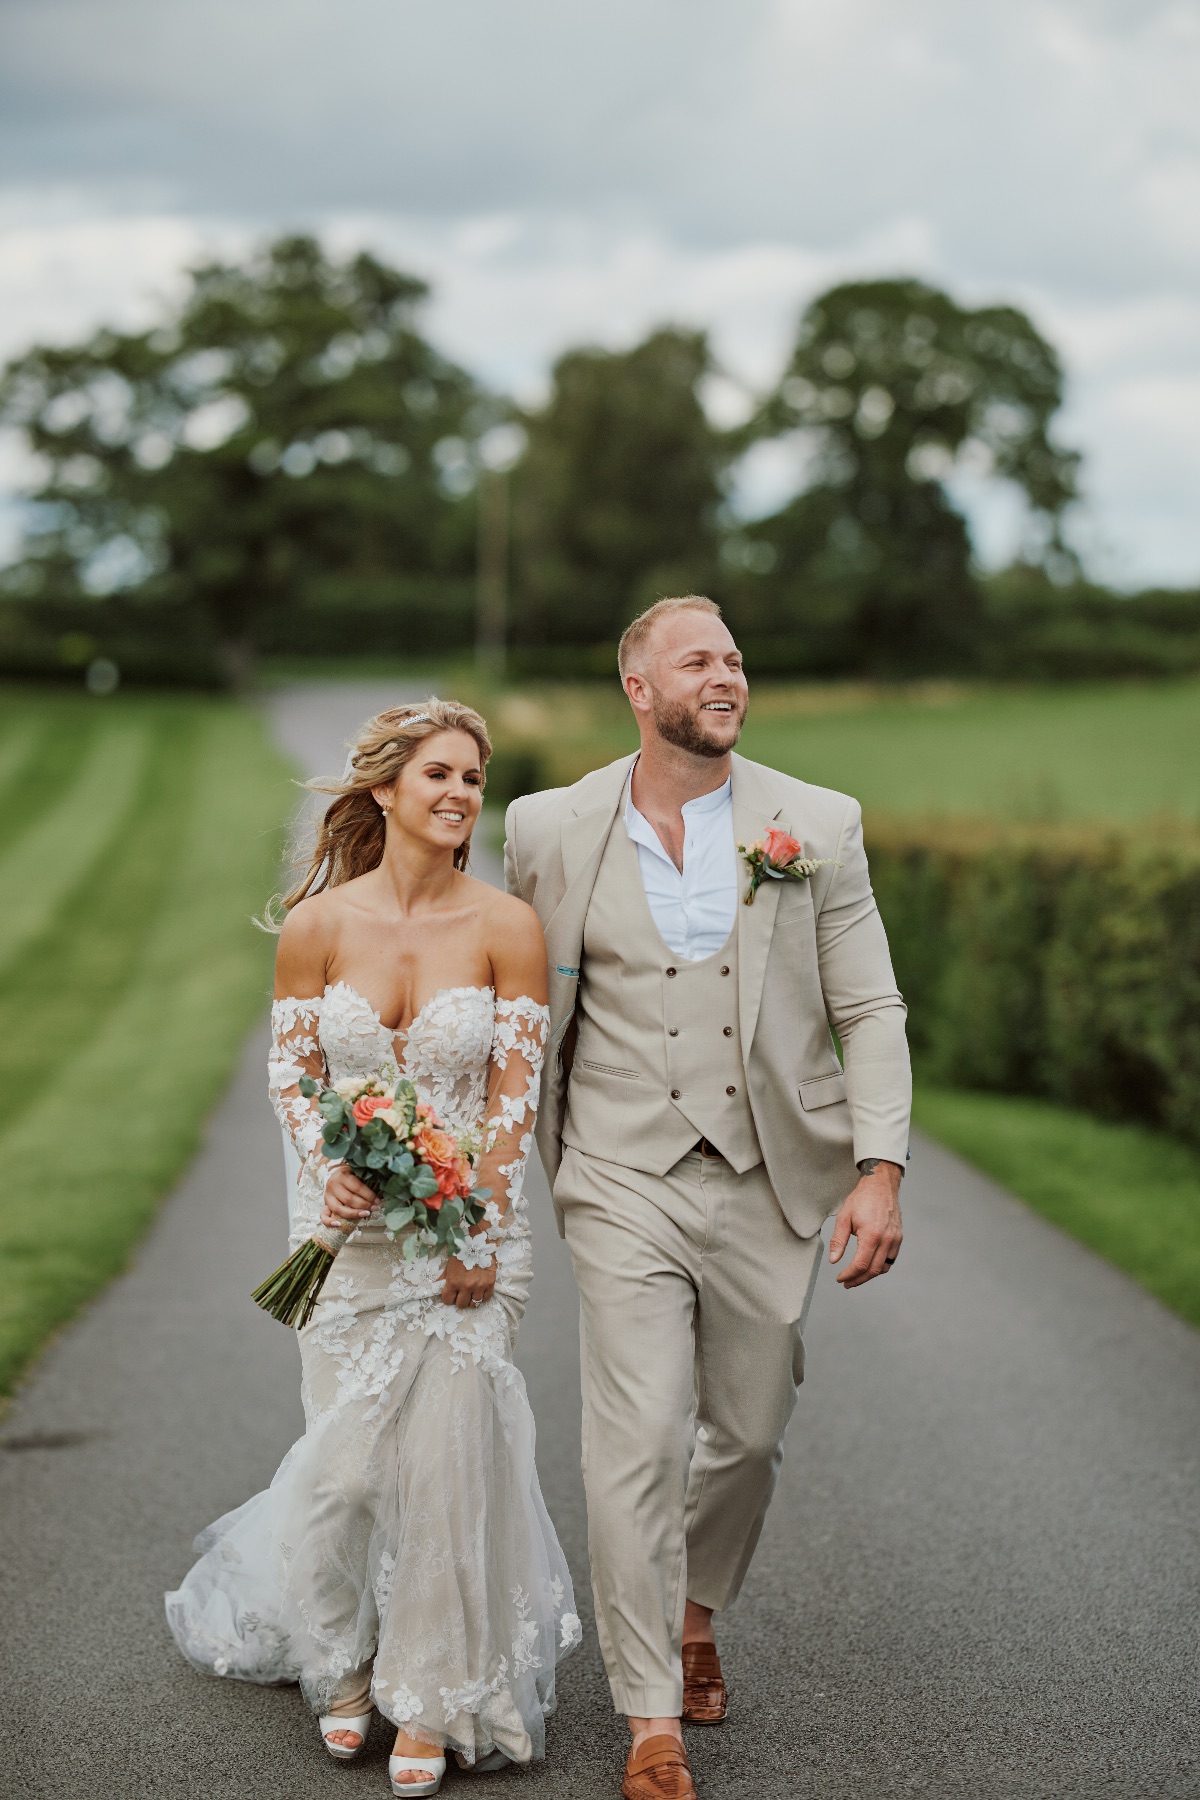 AB Photo has joined UKbride